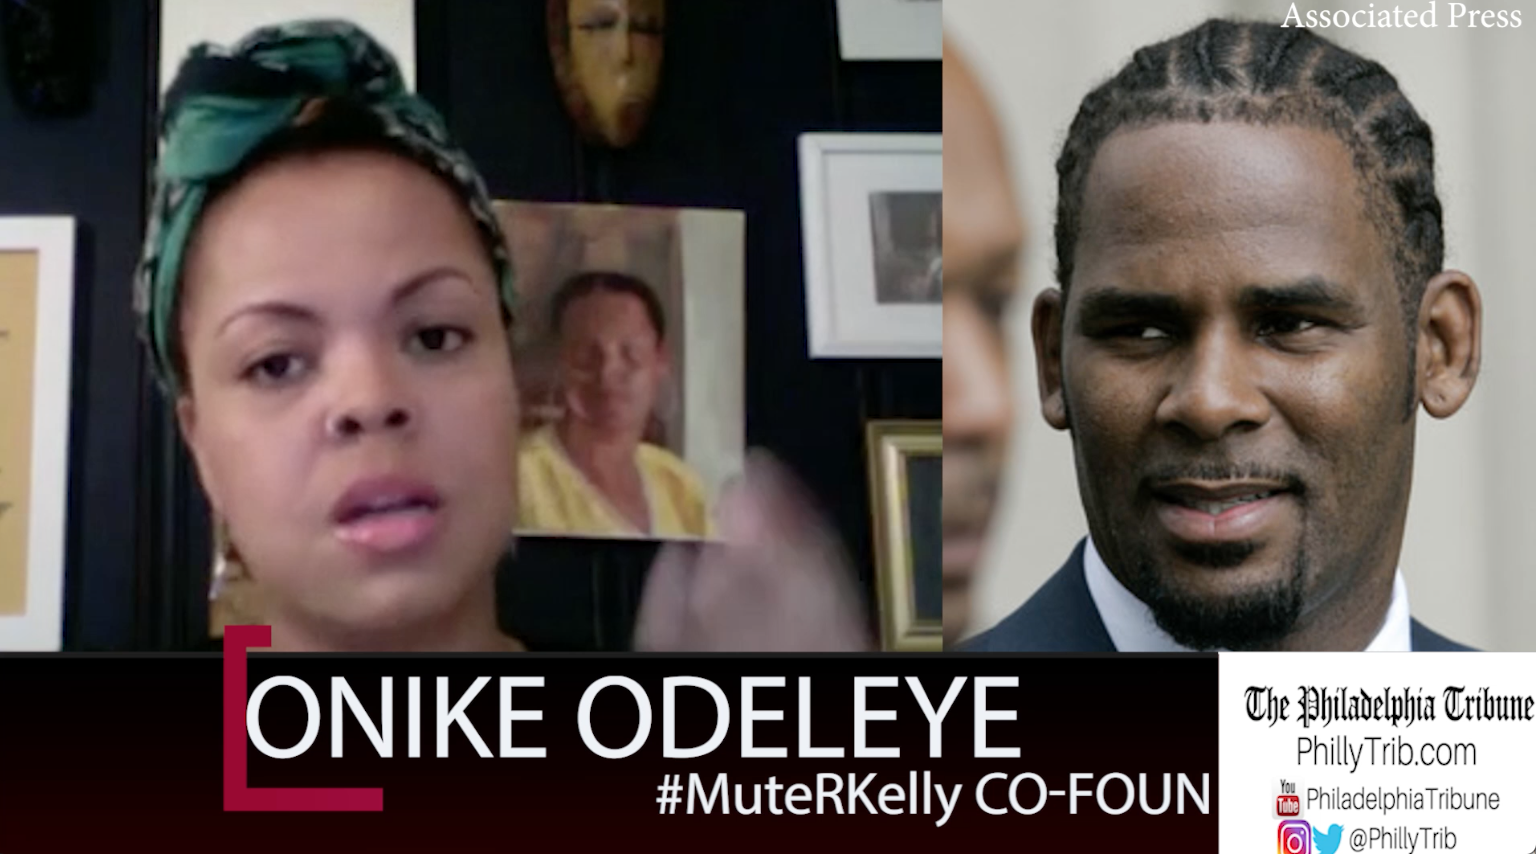 01/31/18: #MuteRKelly calls for silencing R. Kelly music